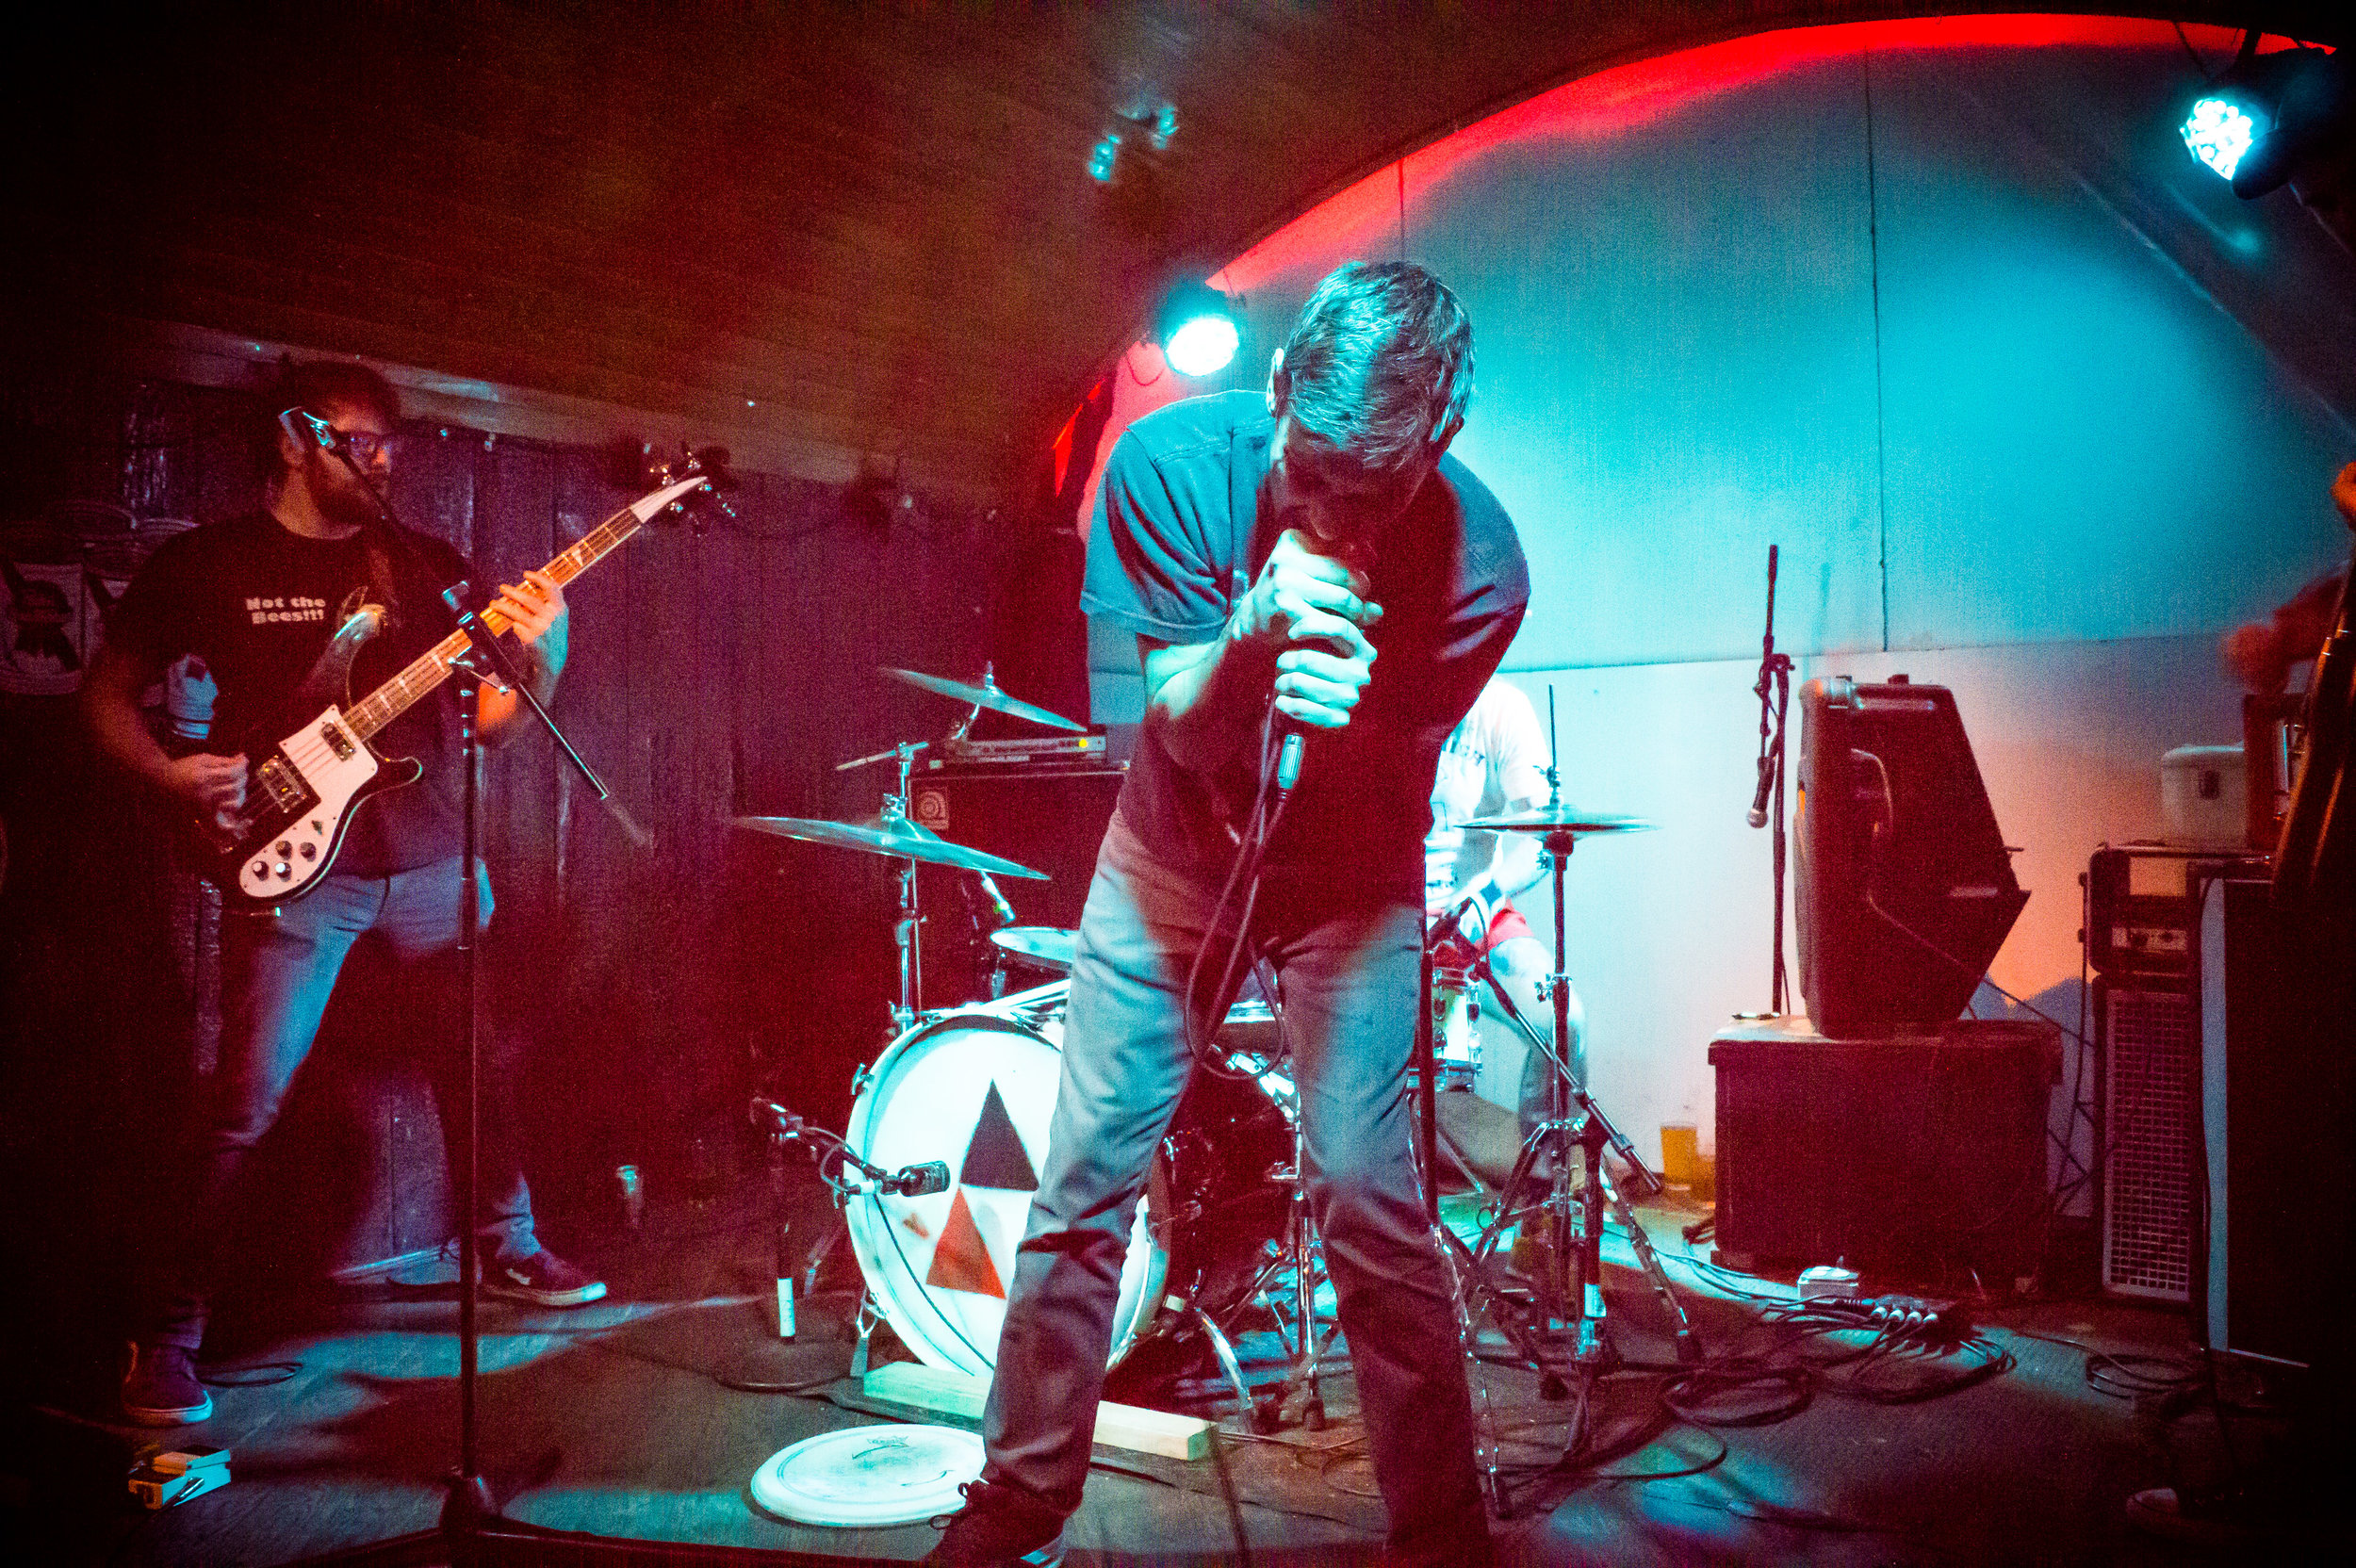 From Creepoid's EP release show at Kung fu Necktie